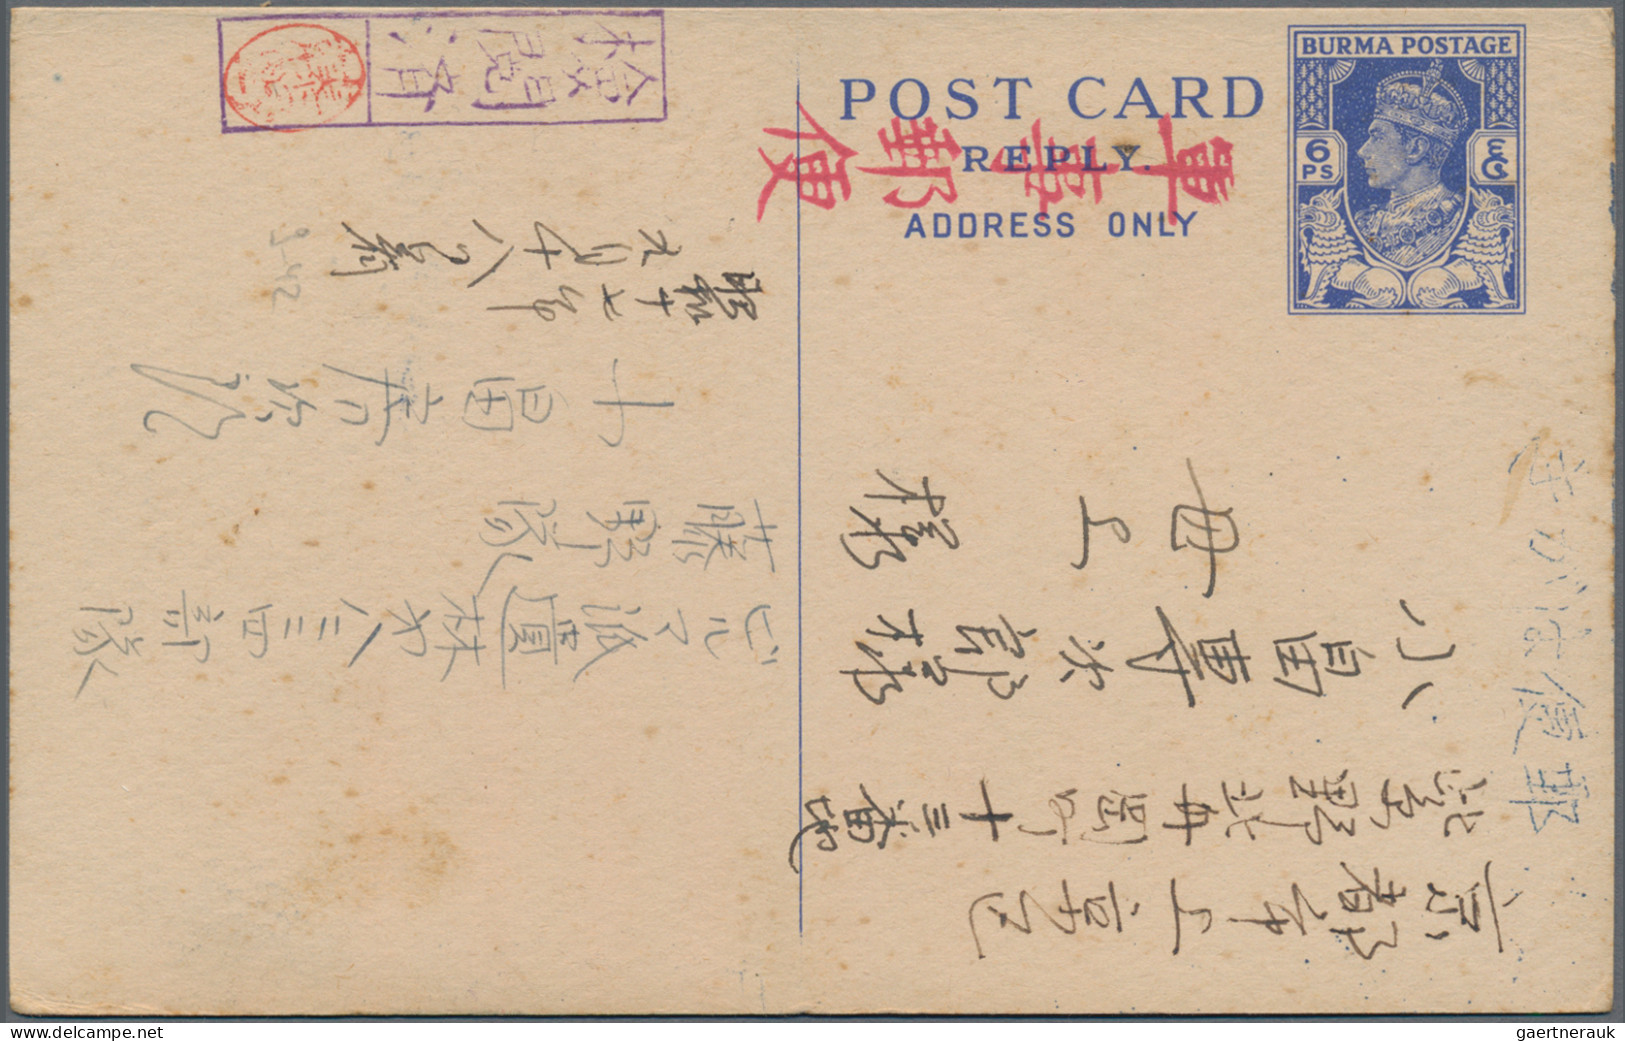 Japanese Occupation WWII: 1942/43, Reply Parts (2) Of KGVI Card 6 Ps. Blue Used - Myanmar (Birmanie 1948-...)